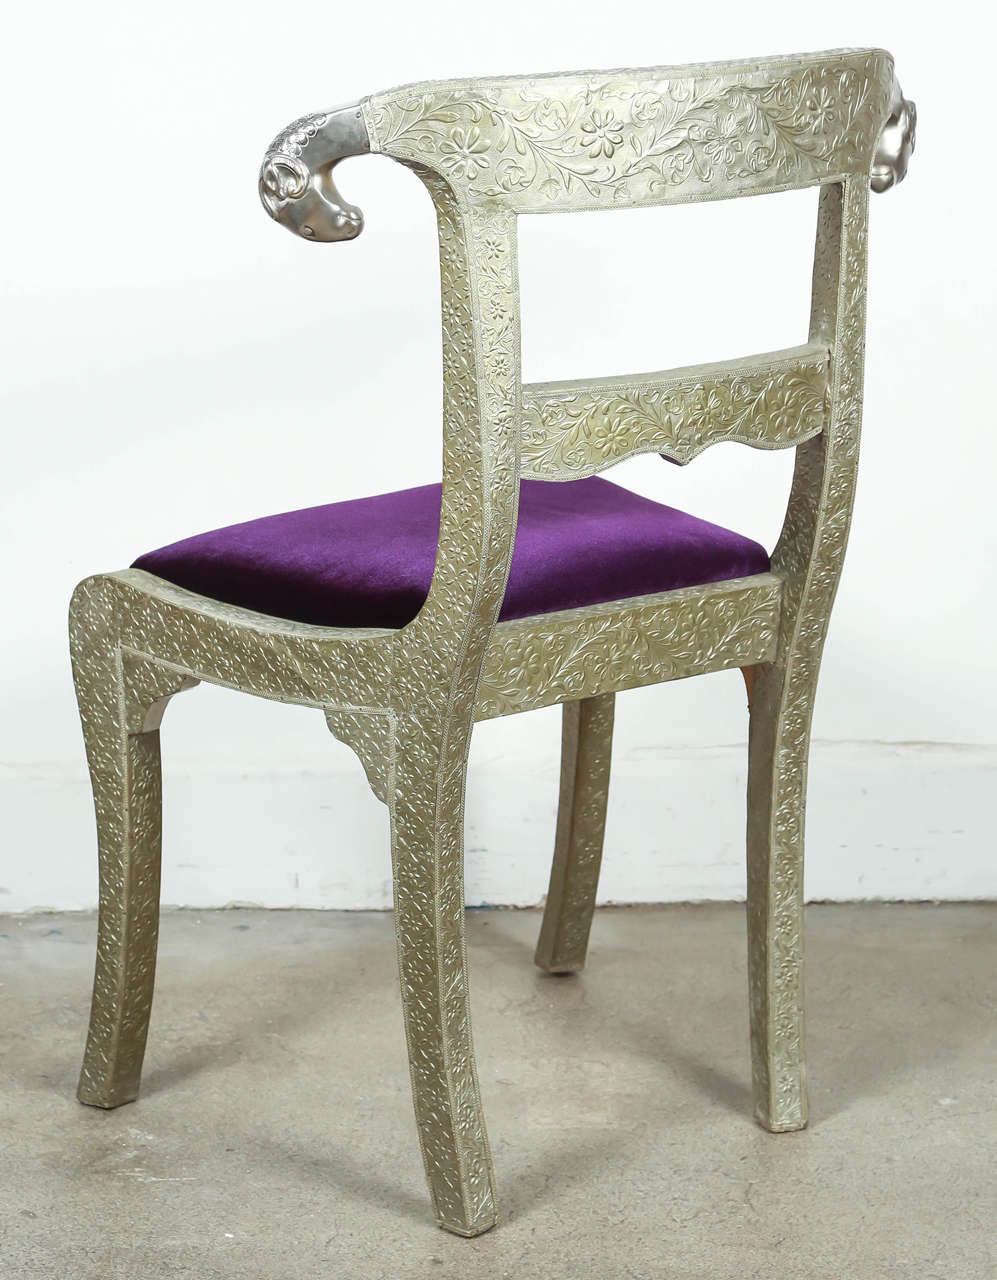 Anglo-Indian silvered wrapped clad side chair.
Anglo Raj wedding palace chair, hand-hammered with repousse silver metal work over wood with carved ram head finals and Moroccan purple velvet covered cushion, very nice and unusual.
Vintage